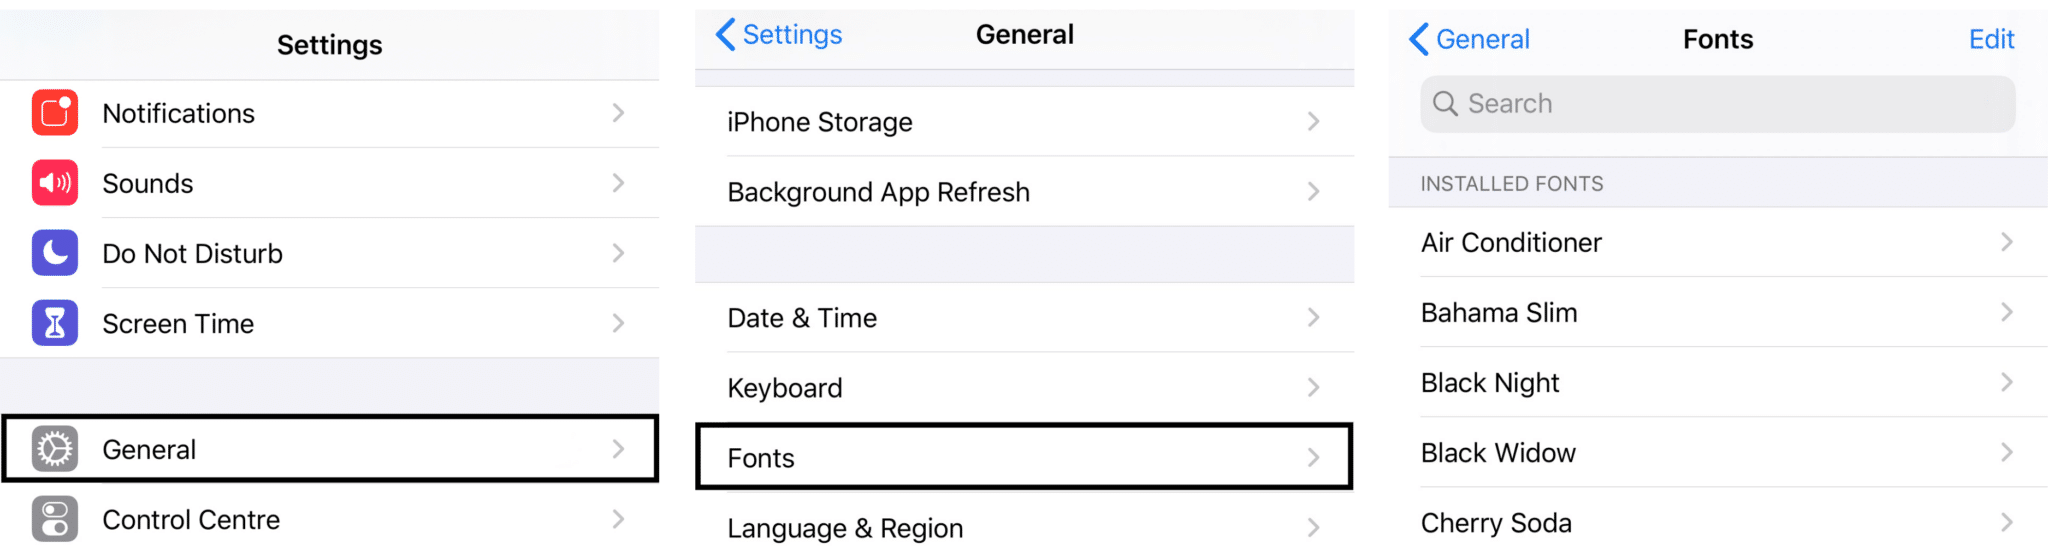 View fonts on IOS 13